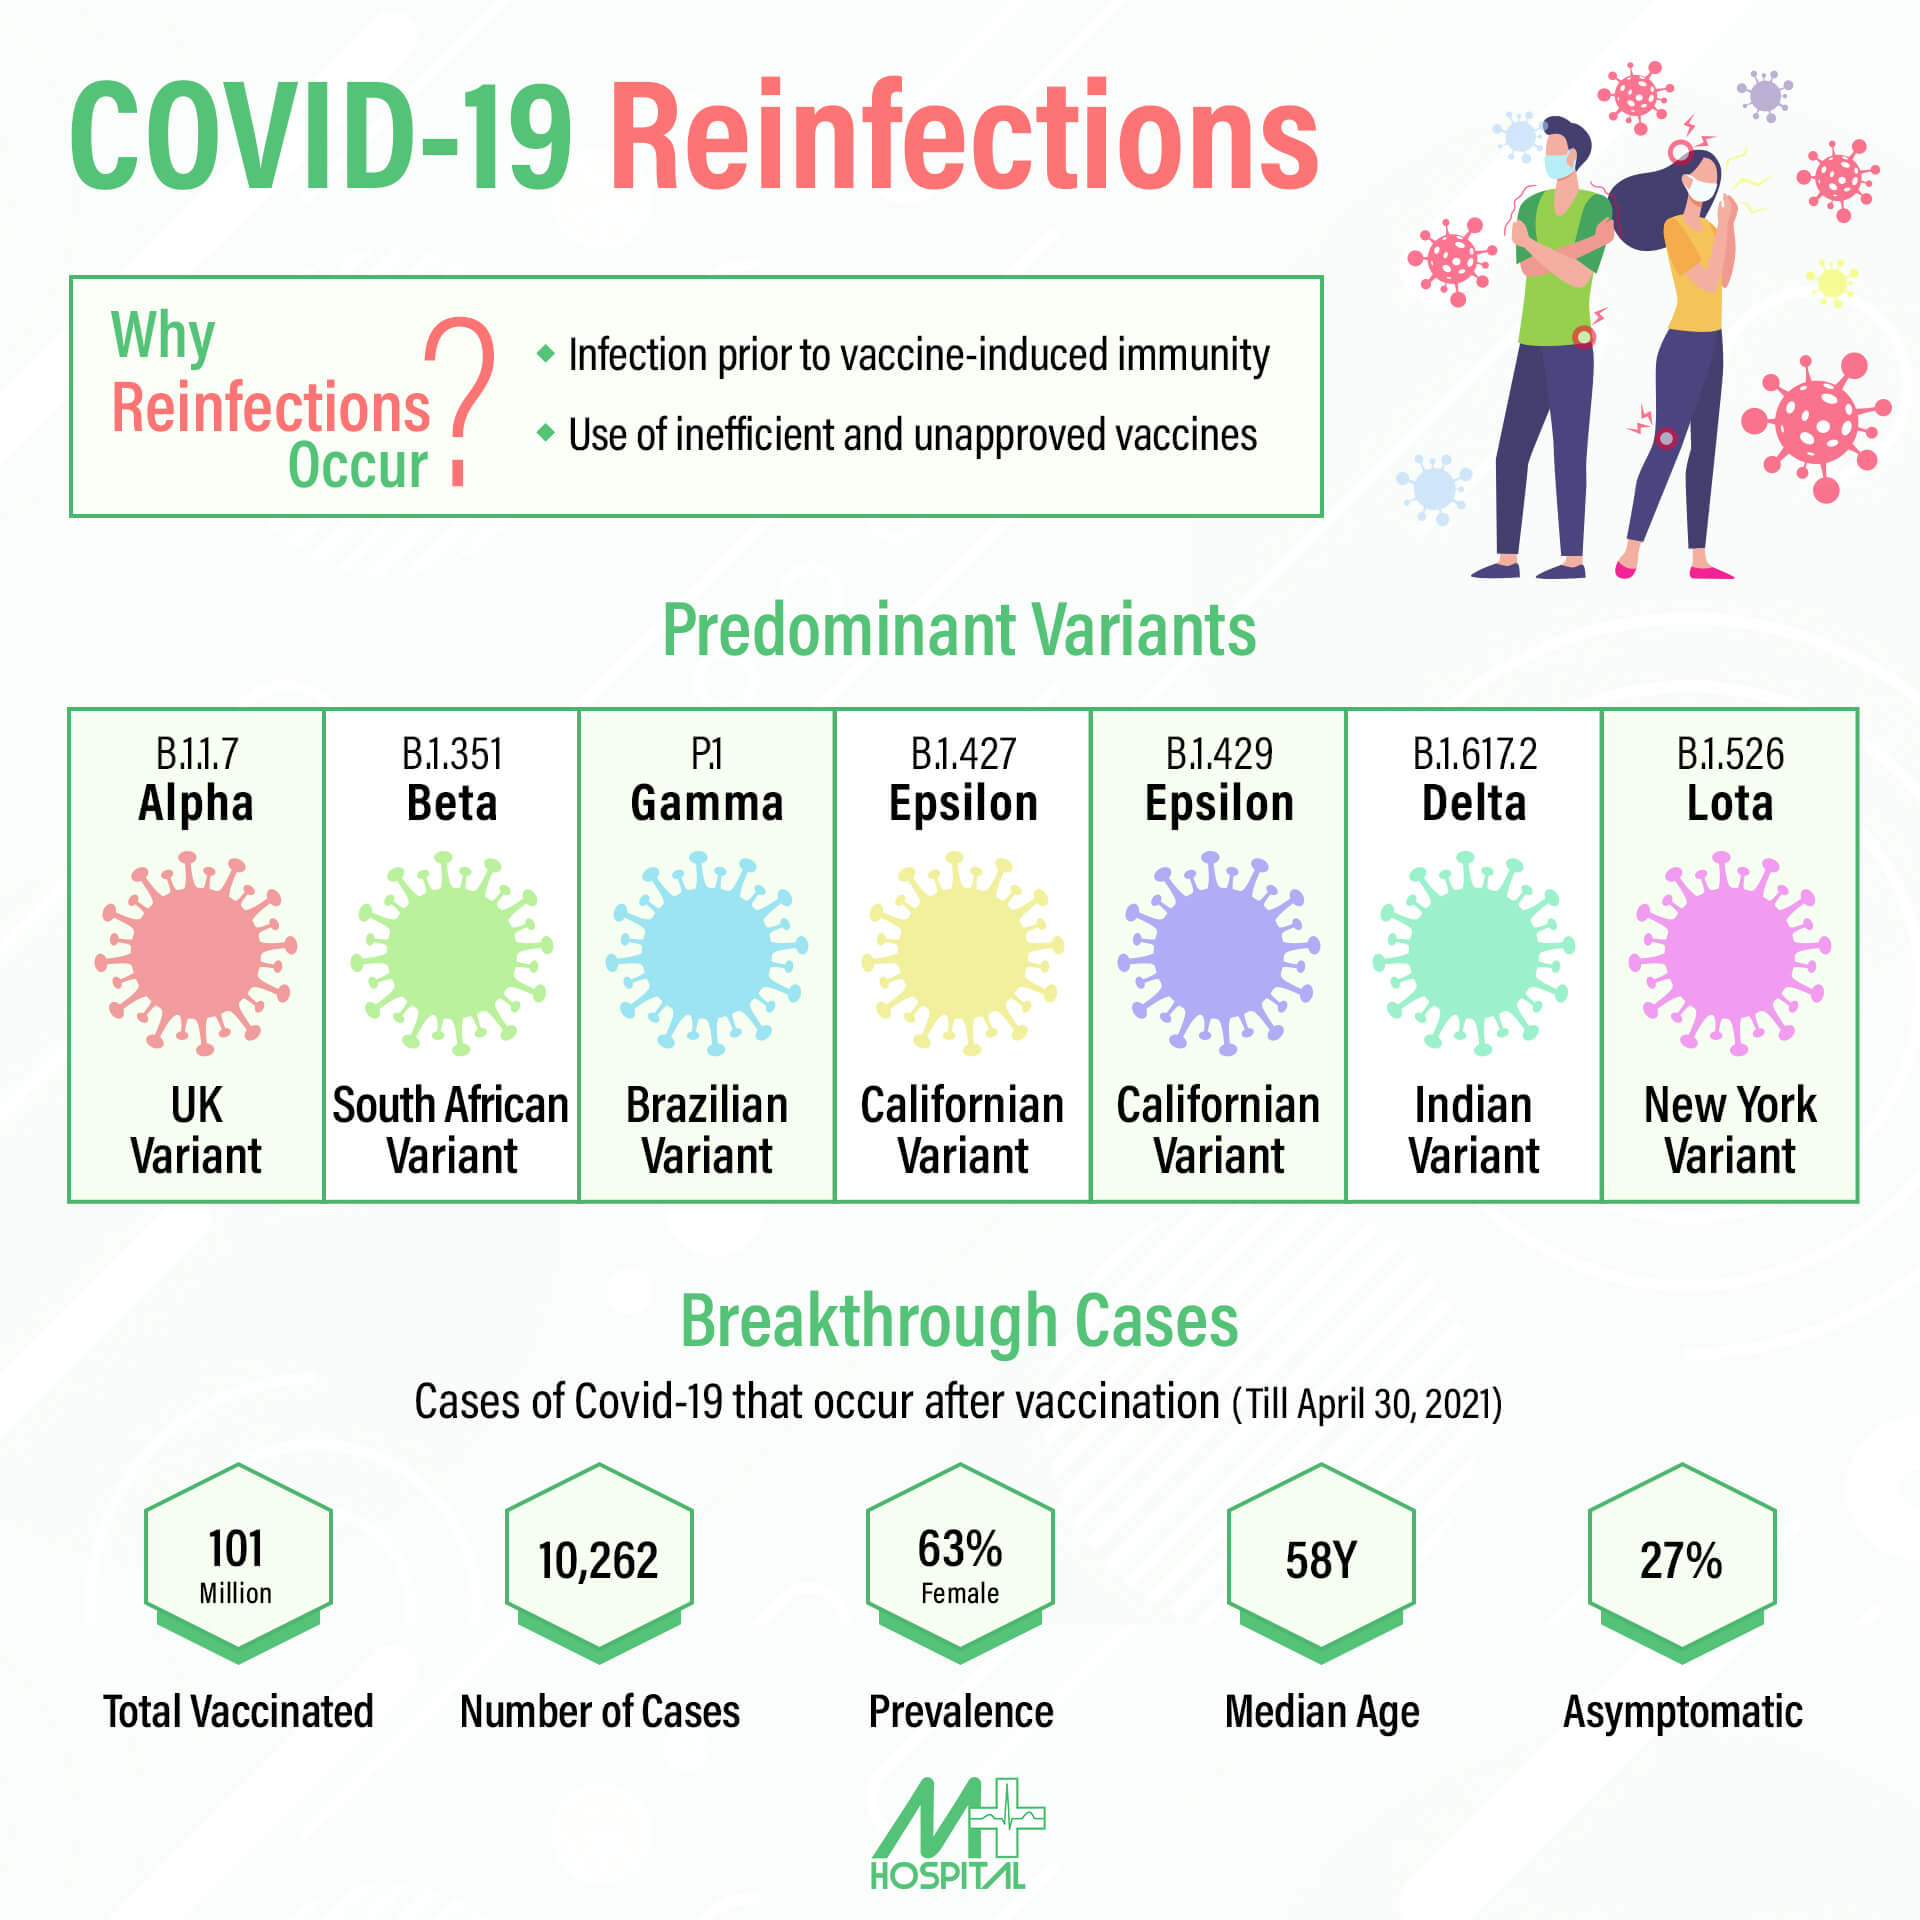 COVID-19 Reinfections